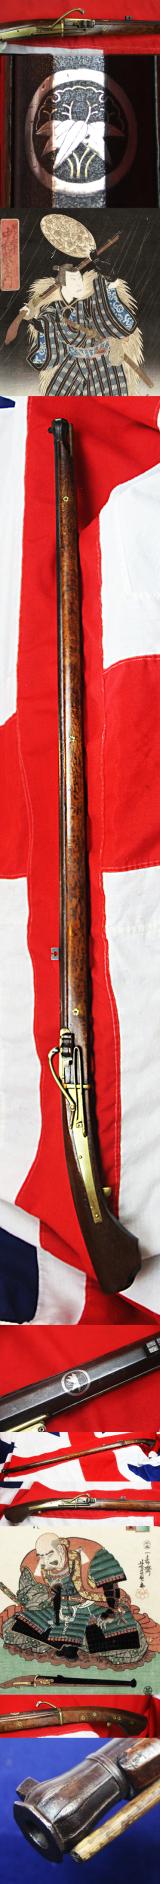 A Superb Edo Period Samurai Teppo {Arquebus Musket} With Signed Barrel Bearing the Silver Clan Mon of the Minamoto. One of The Greatest Clans of Samurai History